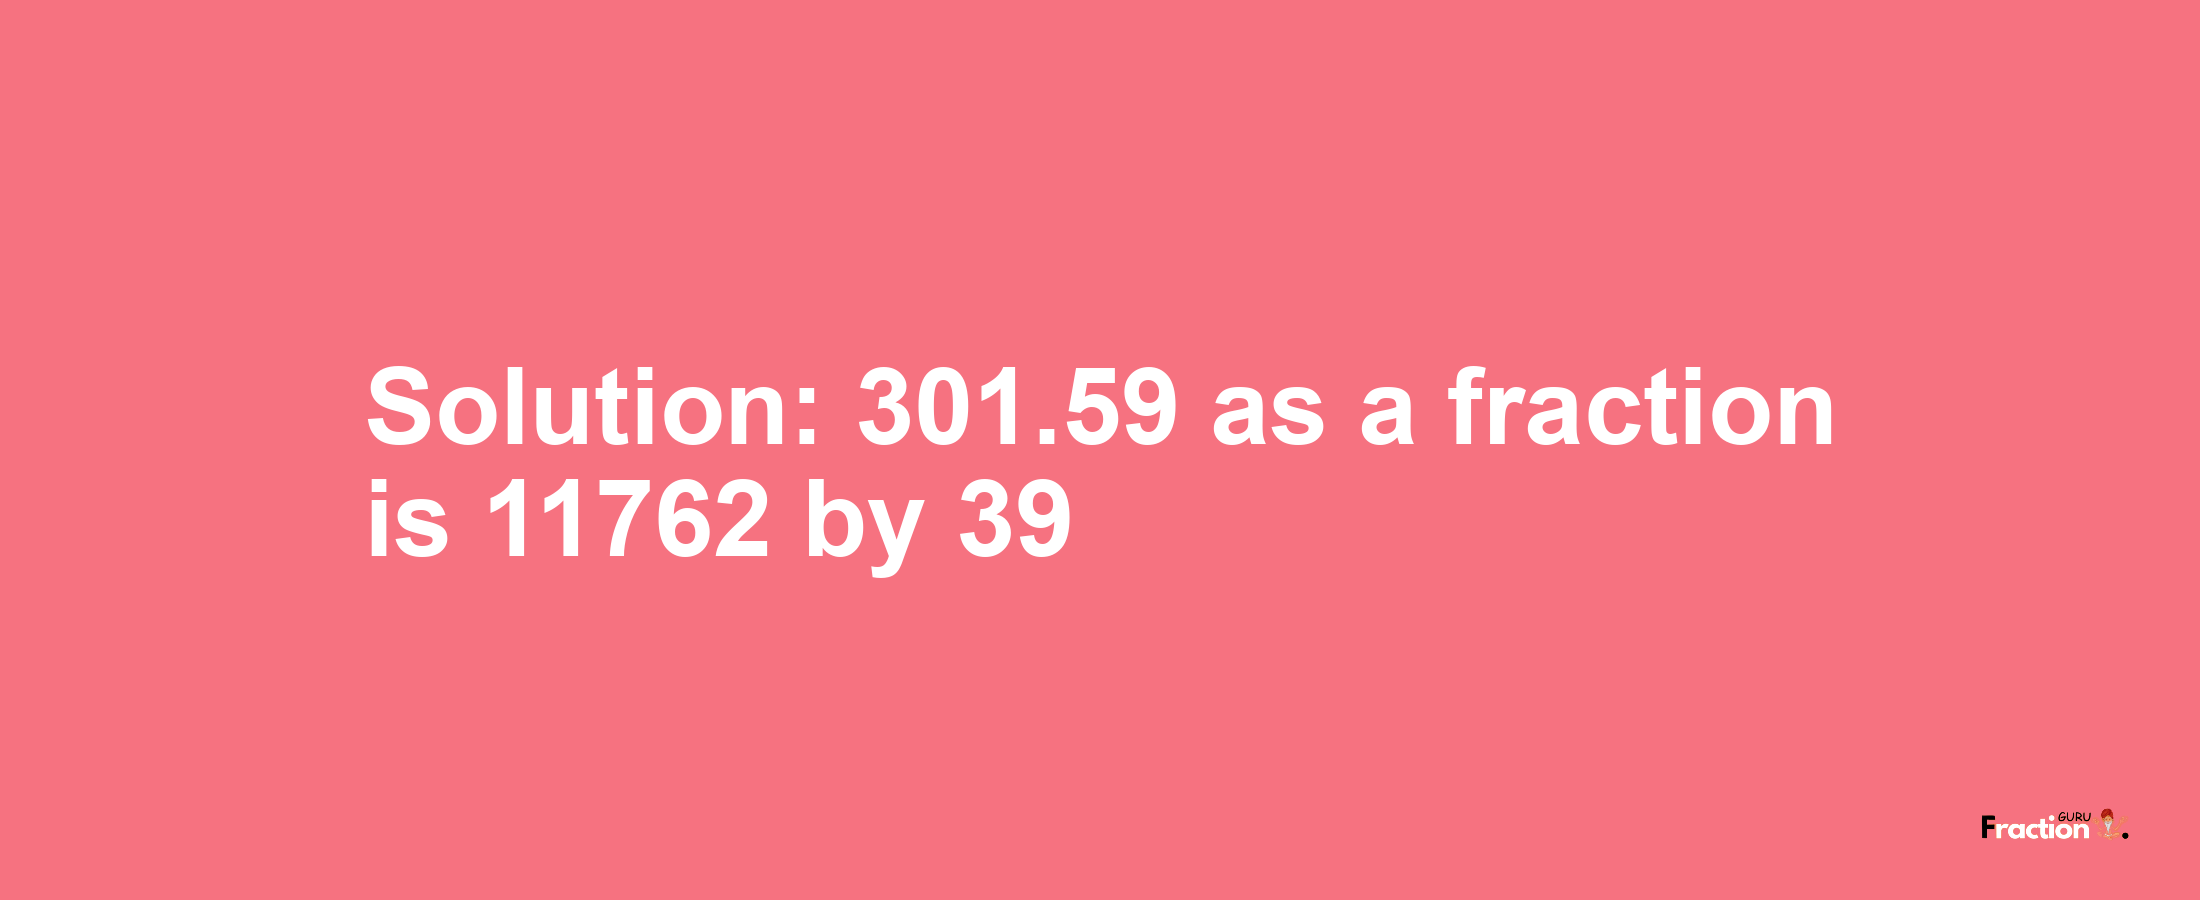 Solution:301.59 as a fraction is 11762/39